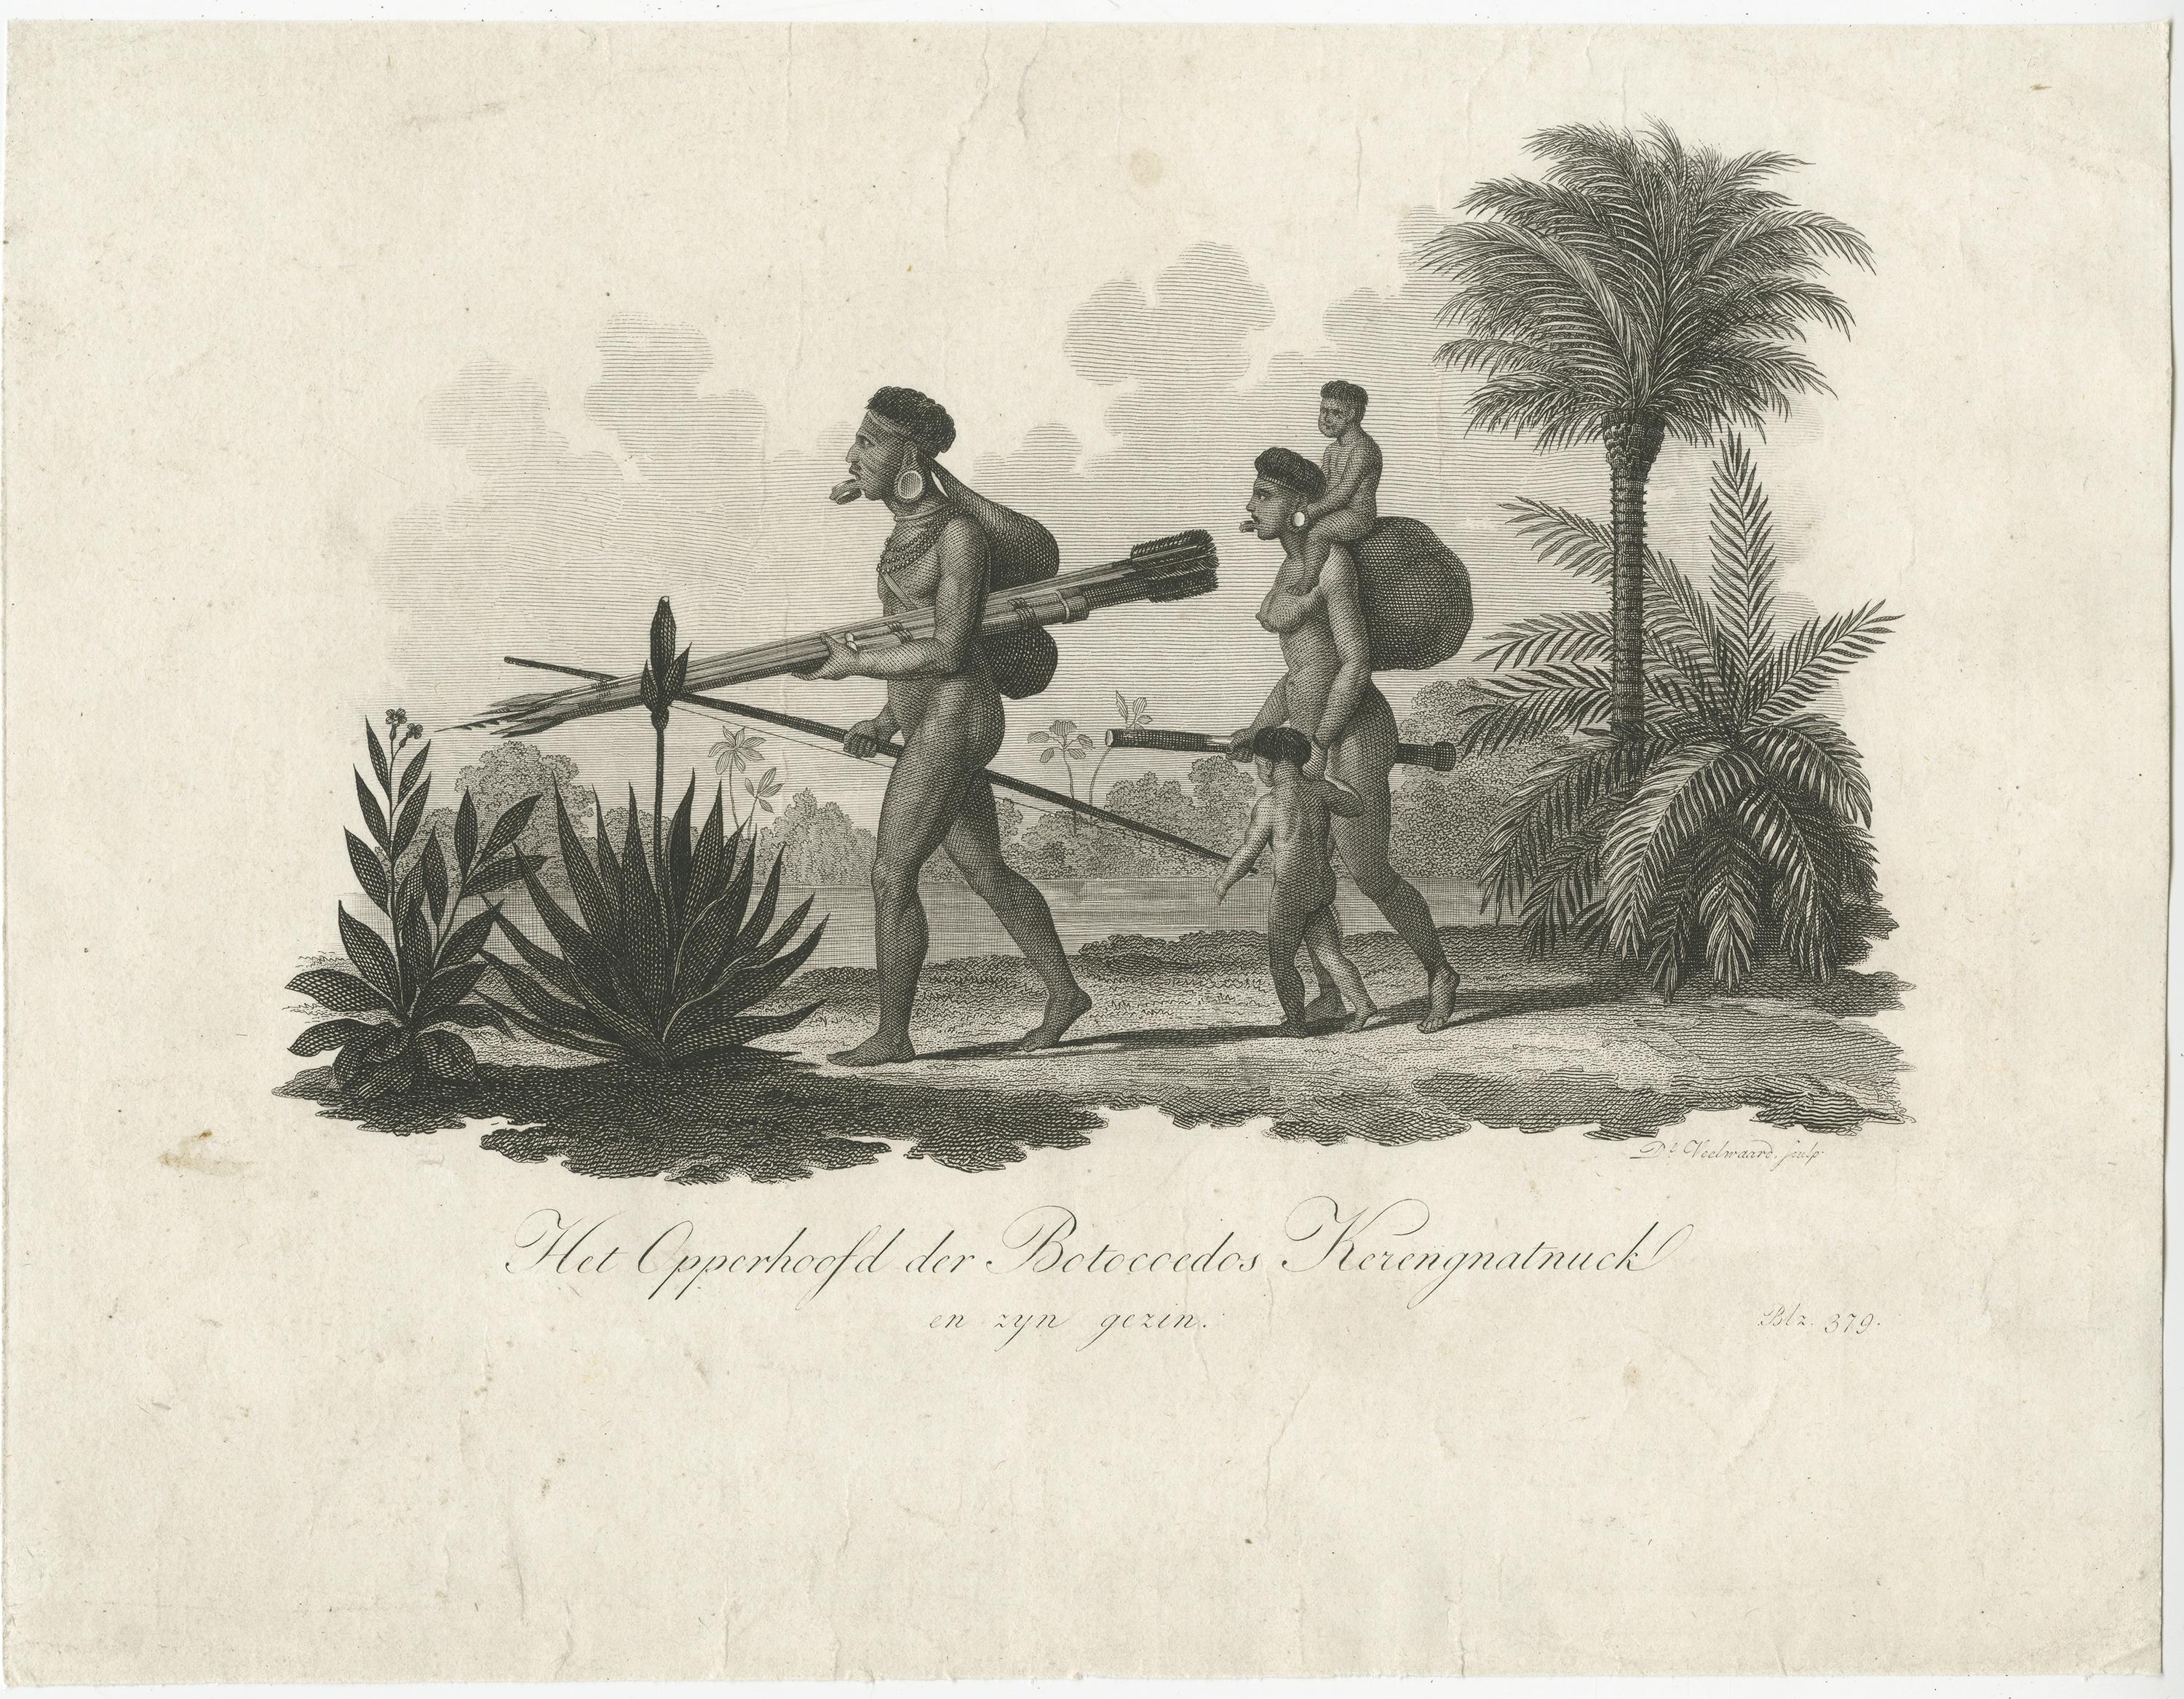 Antique print titled 'Het Opperhoofd der Botocoedos Kerengnatnuck en zyn gezin'. 

Original antique print of a Botocudo chief with his family. Botocudo are South American Indian people who lived in what is now the Brazilian state of Minas Gerais.